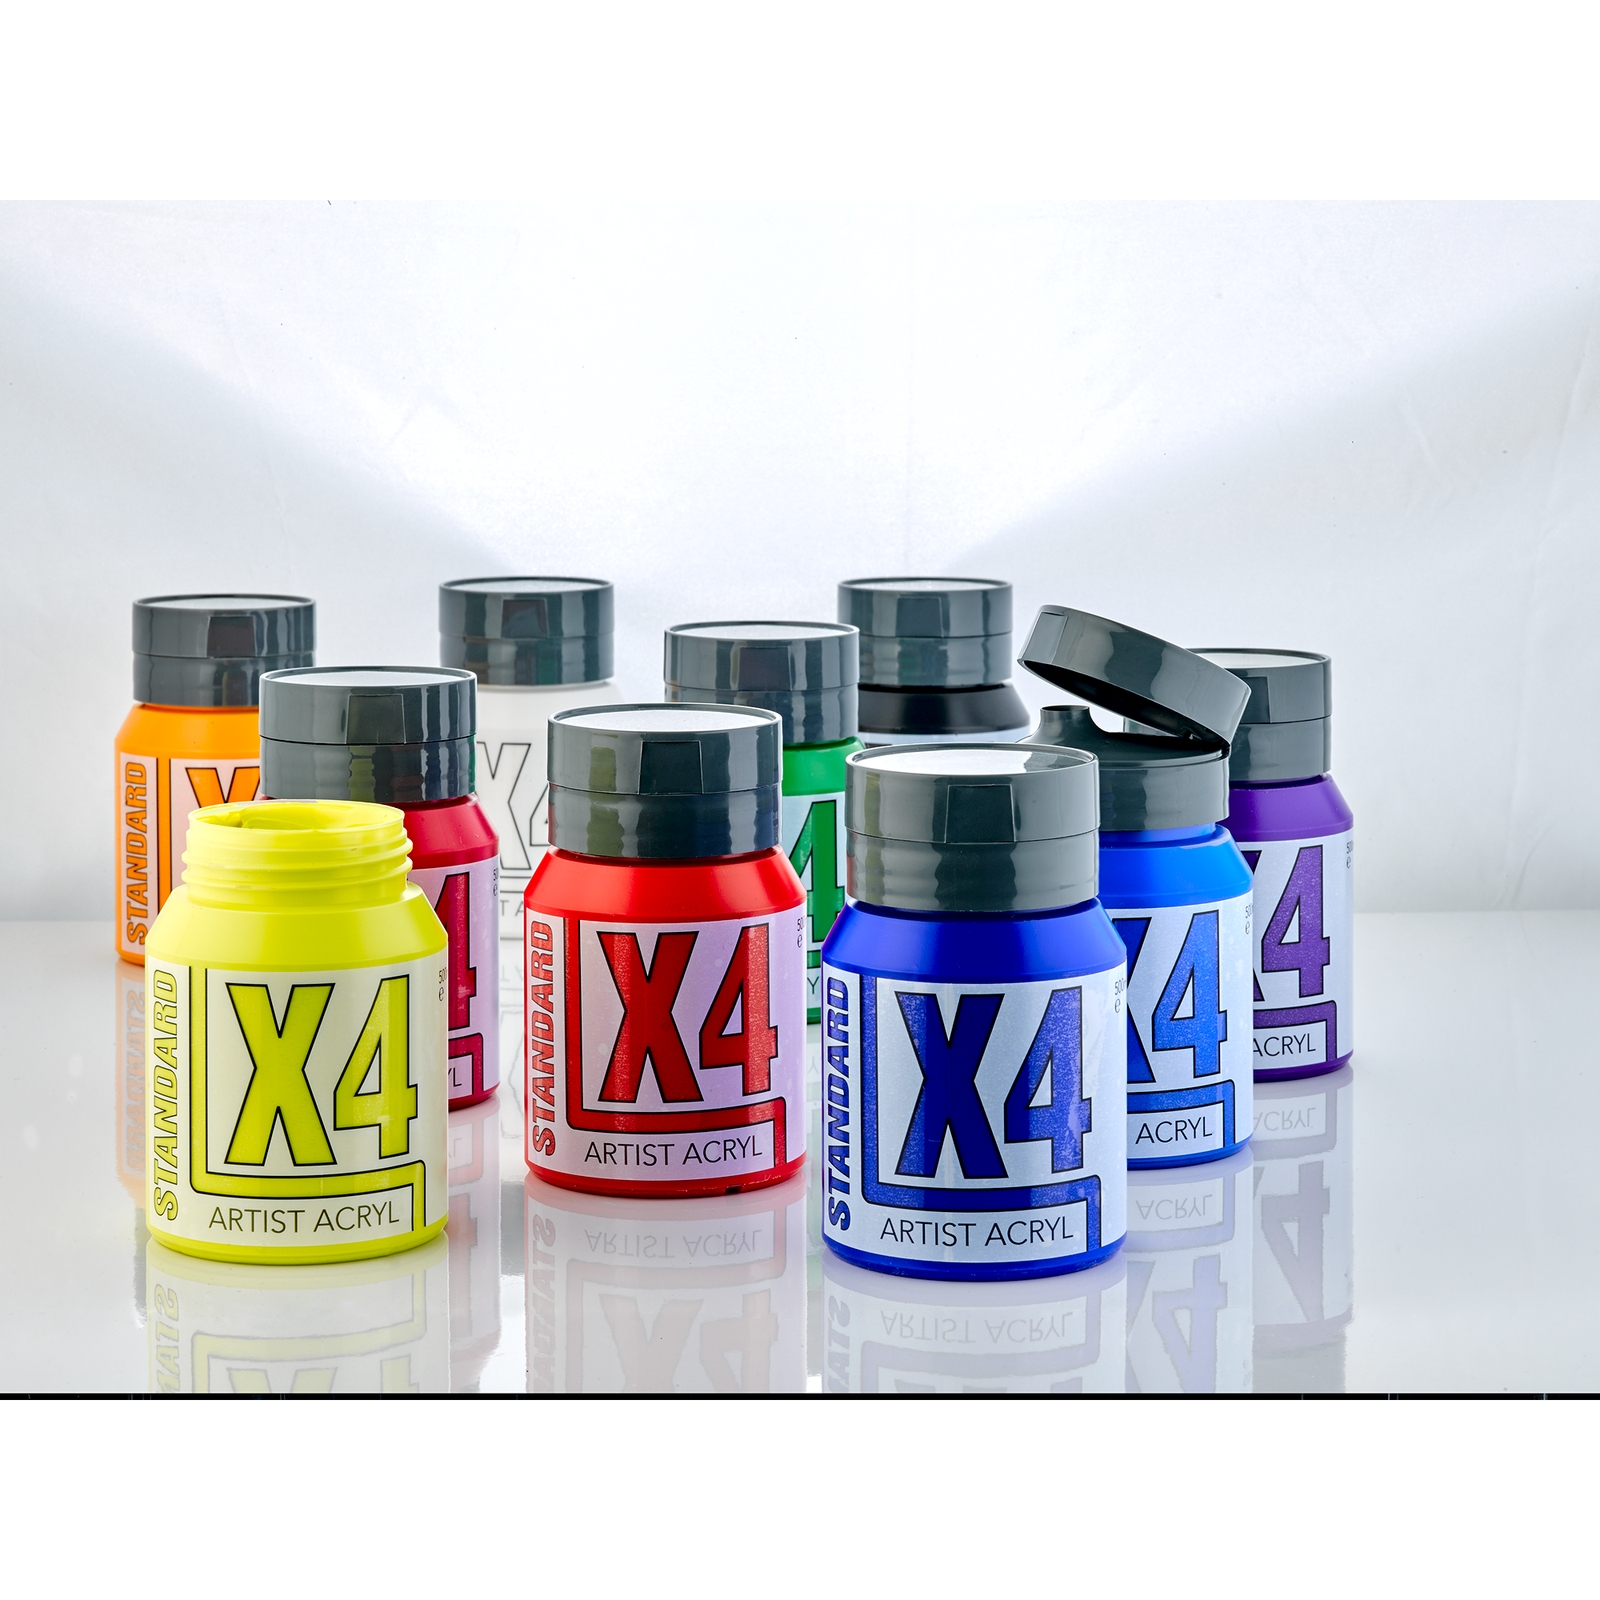 Specialist Crafts X4 Standard Acryl - 500ml - Assorted - Pack of 10